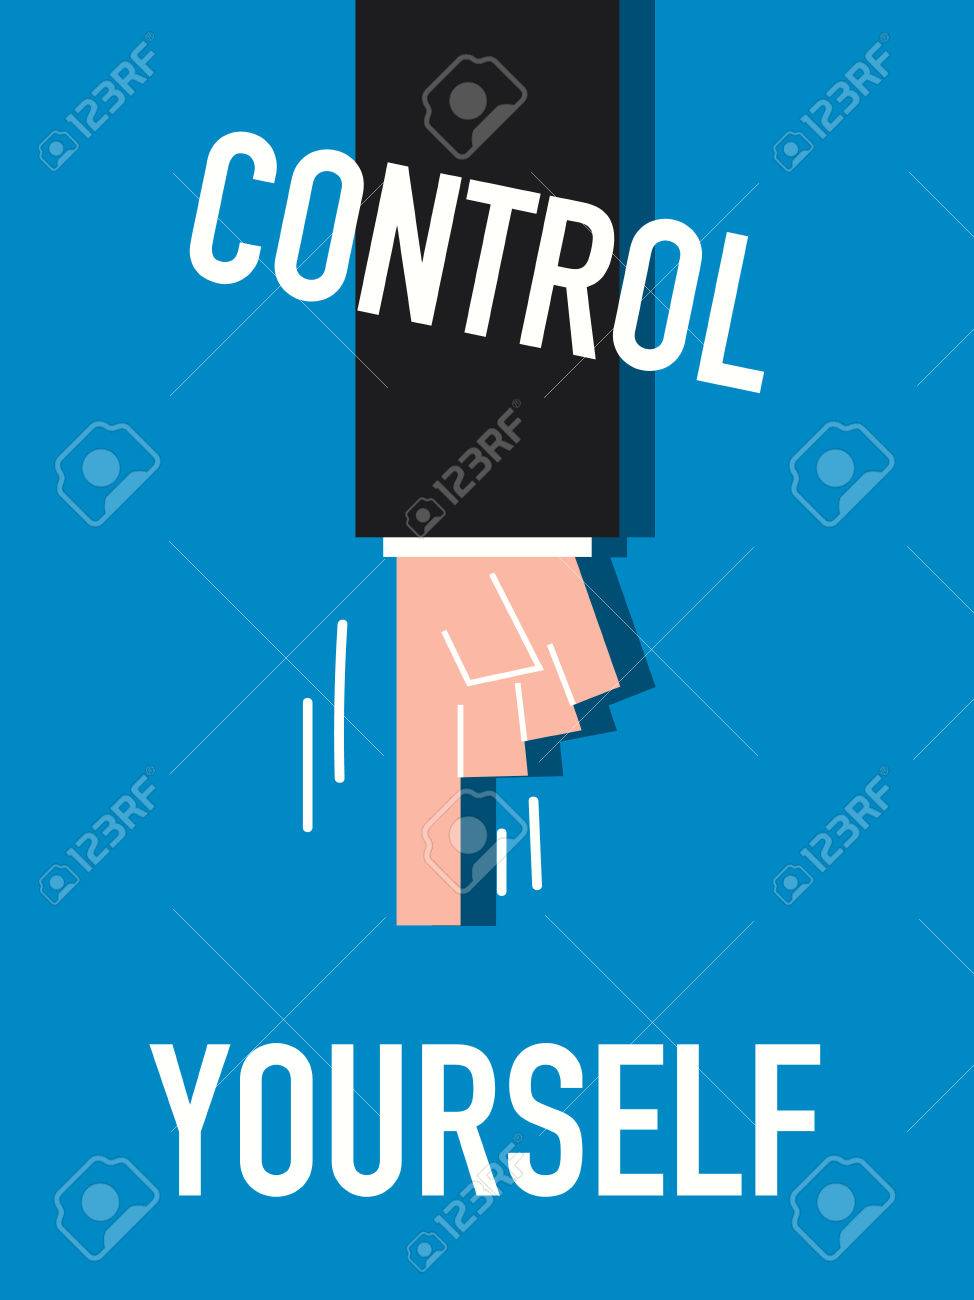 Words CONTROL YOURSELF Royalty Free Cliparts, Vectors, And Stock Illustration. Image 35075717.